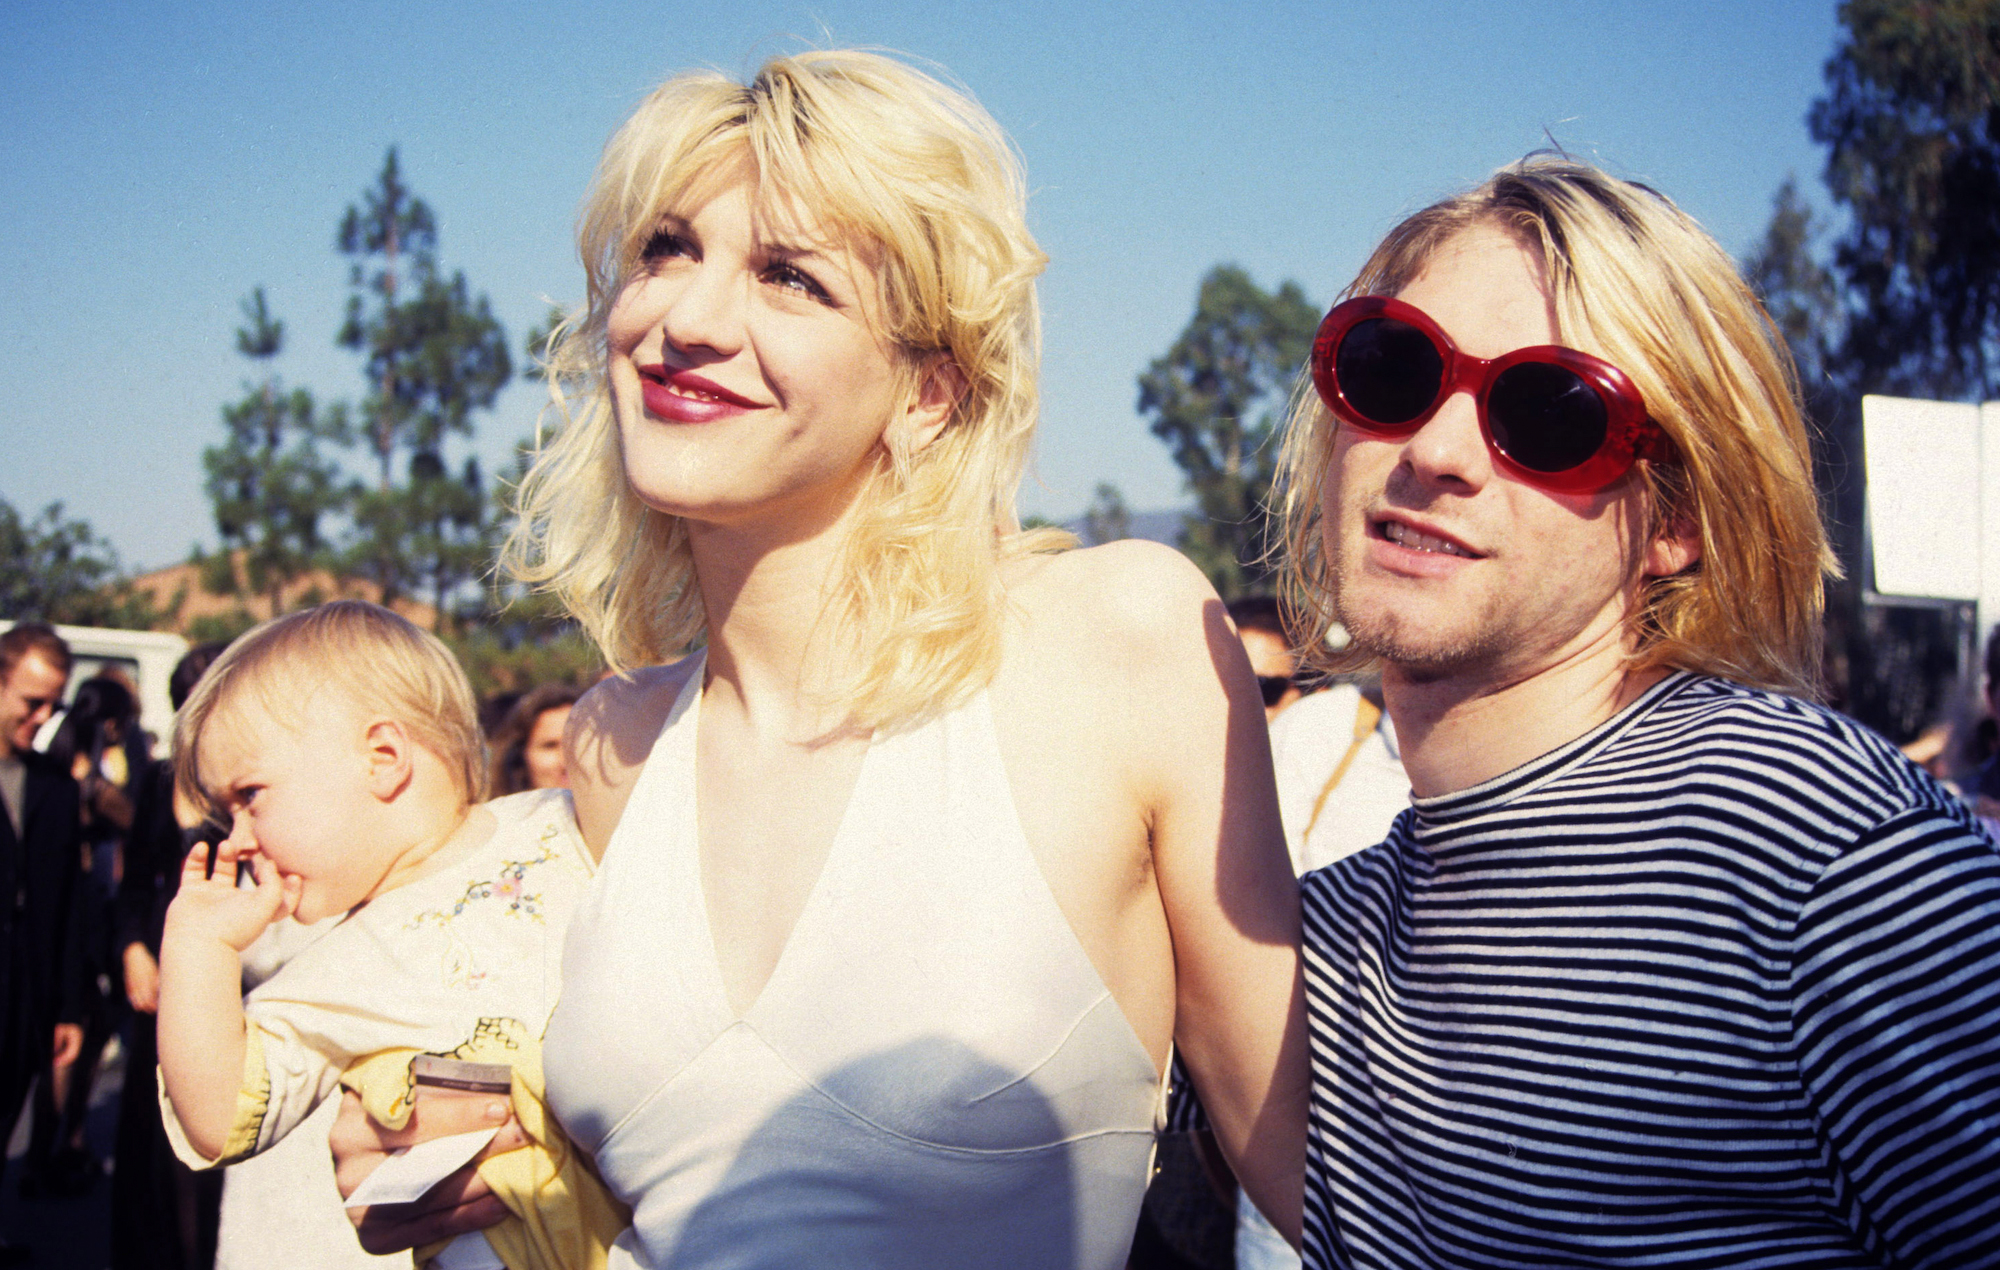 Courtney Love and Kurt Cobain, with daughter Francis Bean Cobain, at the 1993 MTV Video Music Awards. Credit: Terry McGinnis/WireImage